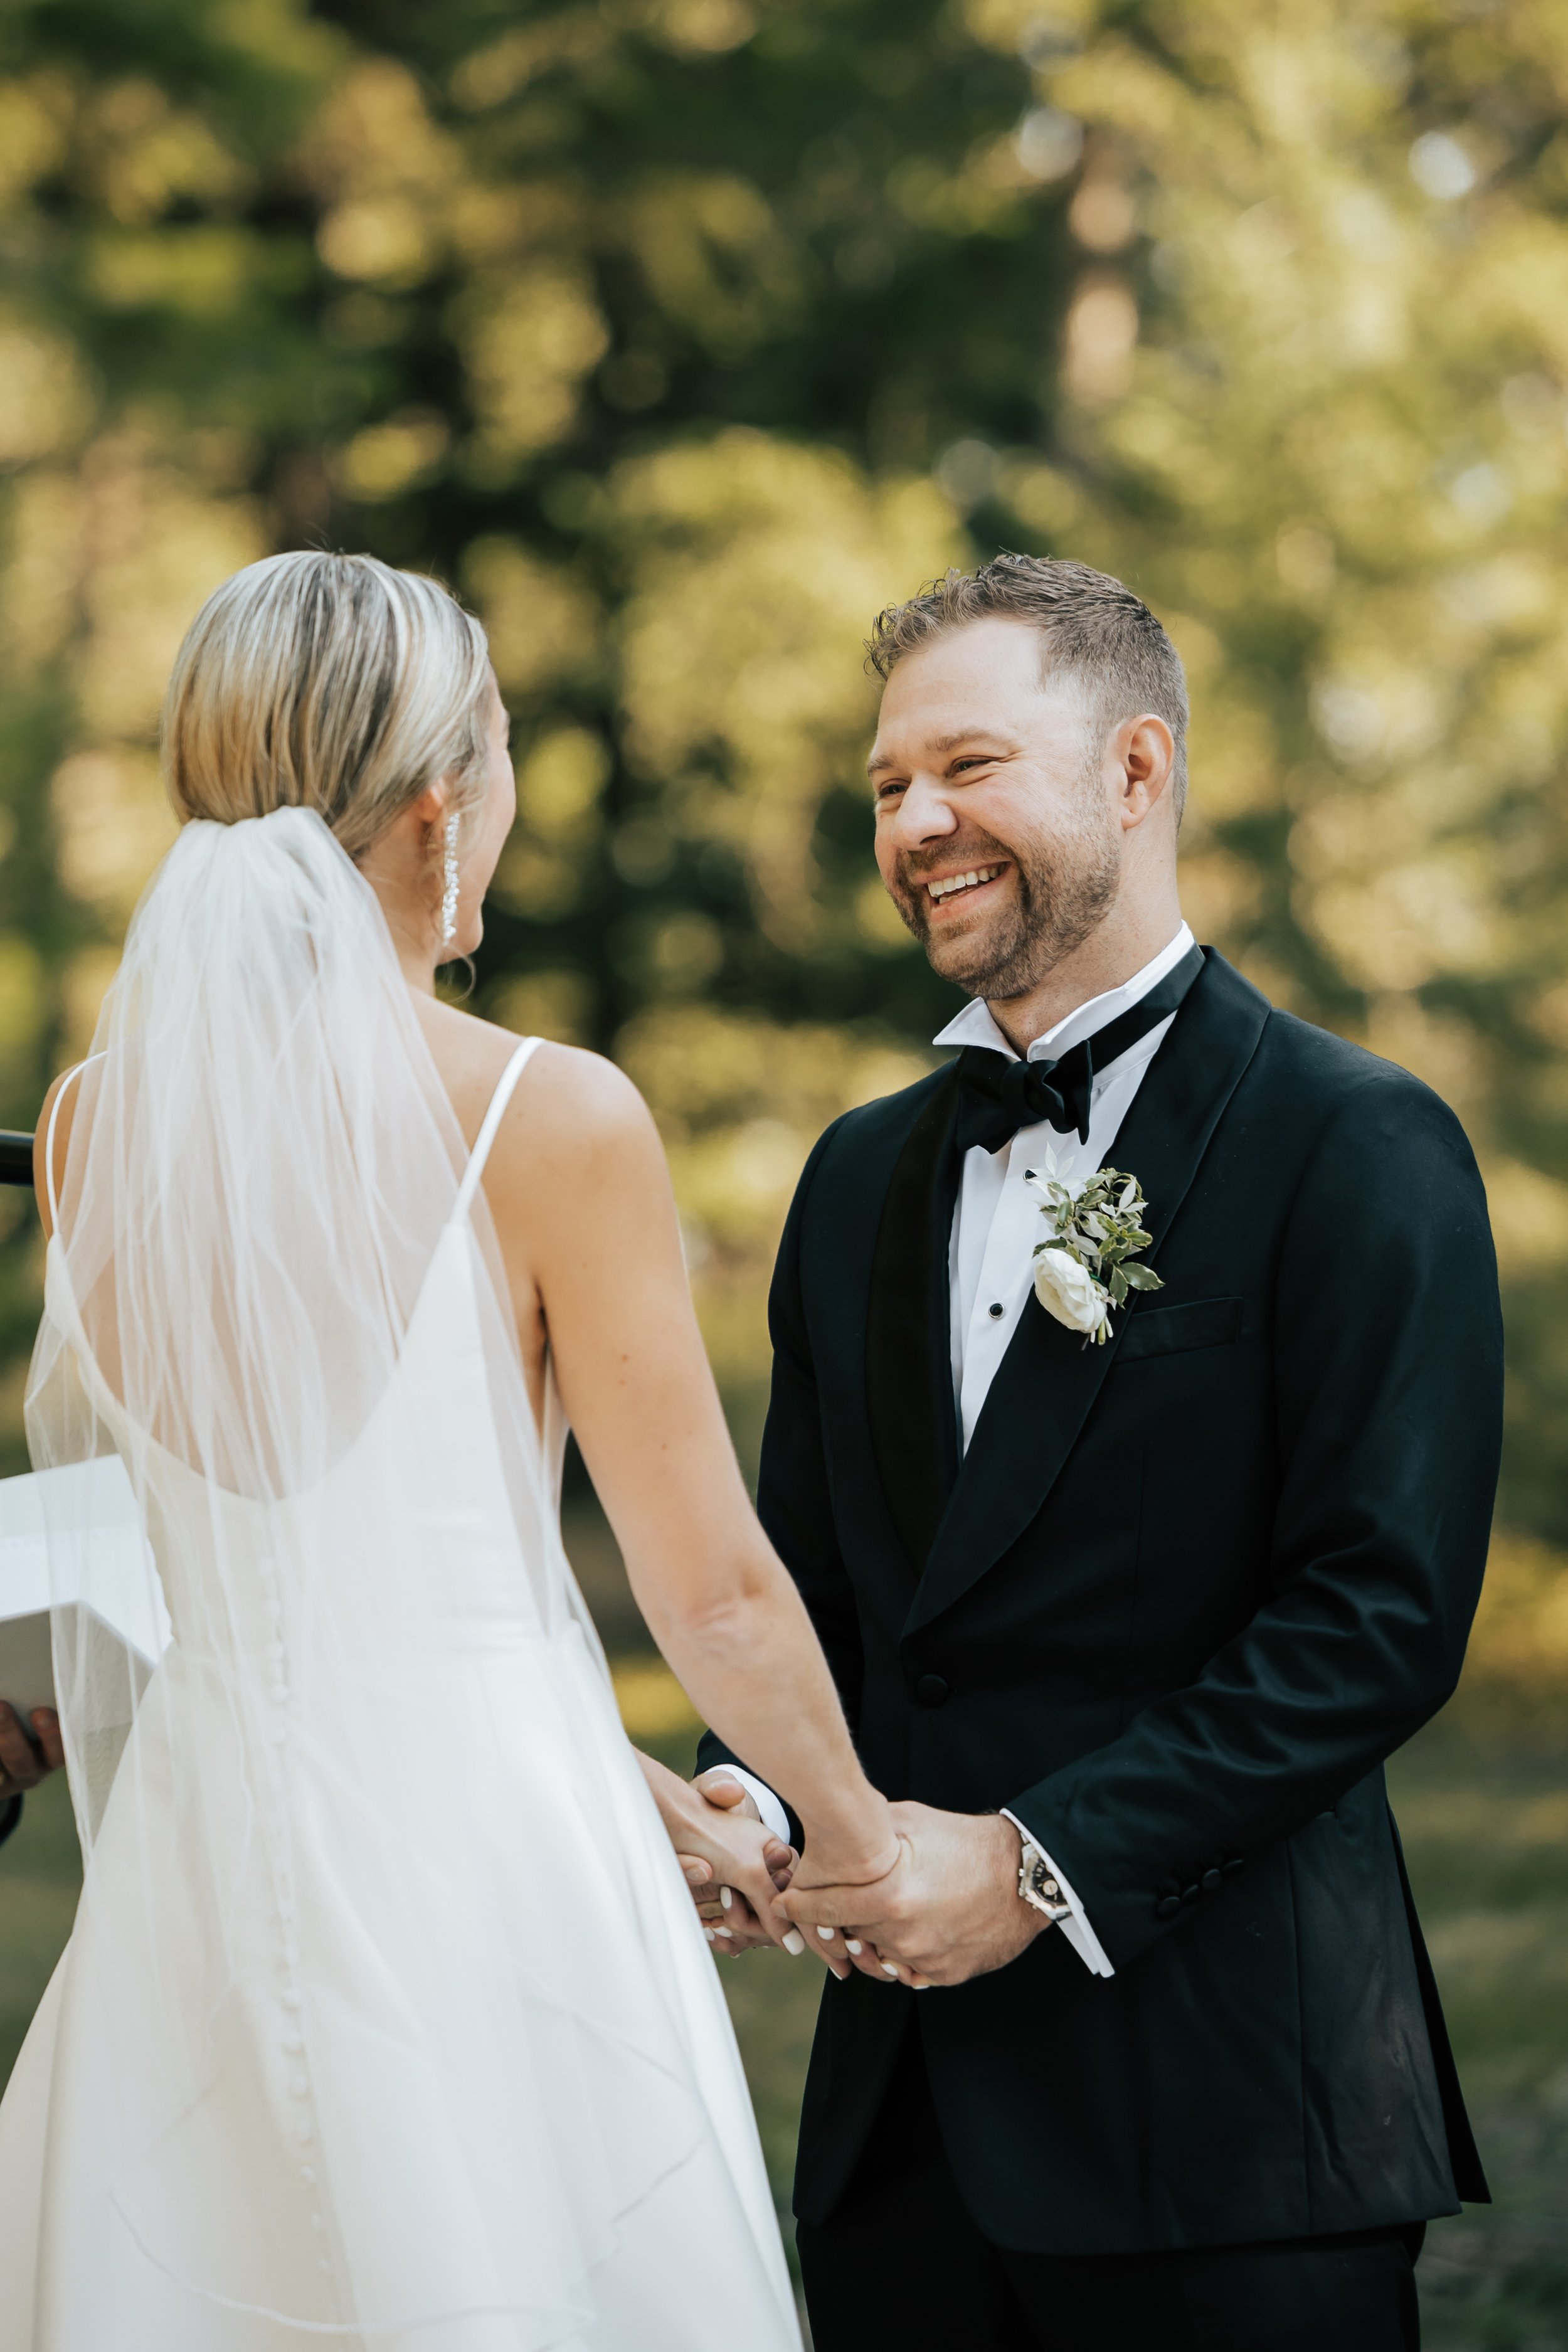  Bride and groom smile at each other during their wedding ceremony in the forest in Whitefish, Montana. Wedding inspo. Bride is wearing gorgeous large white earrings with a strappy wedding dress and veil and groom is wearing a black suit and bowtie. 